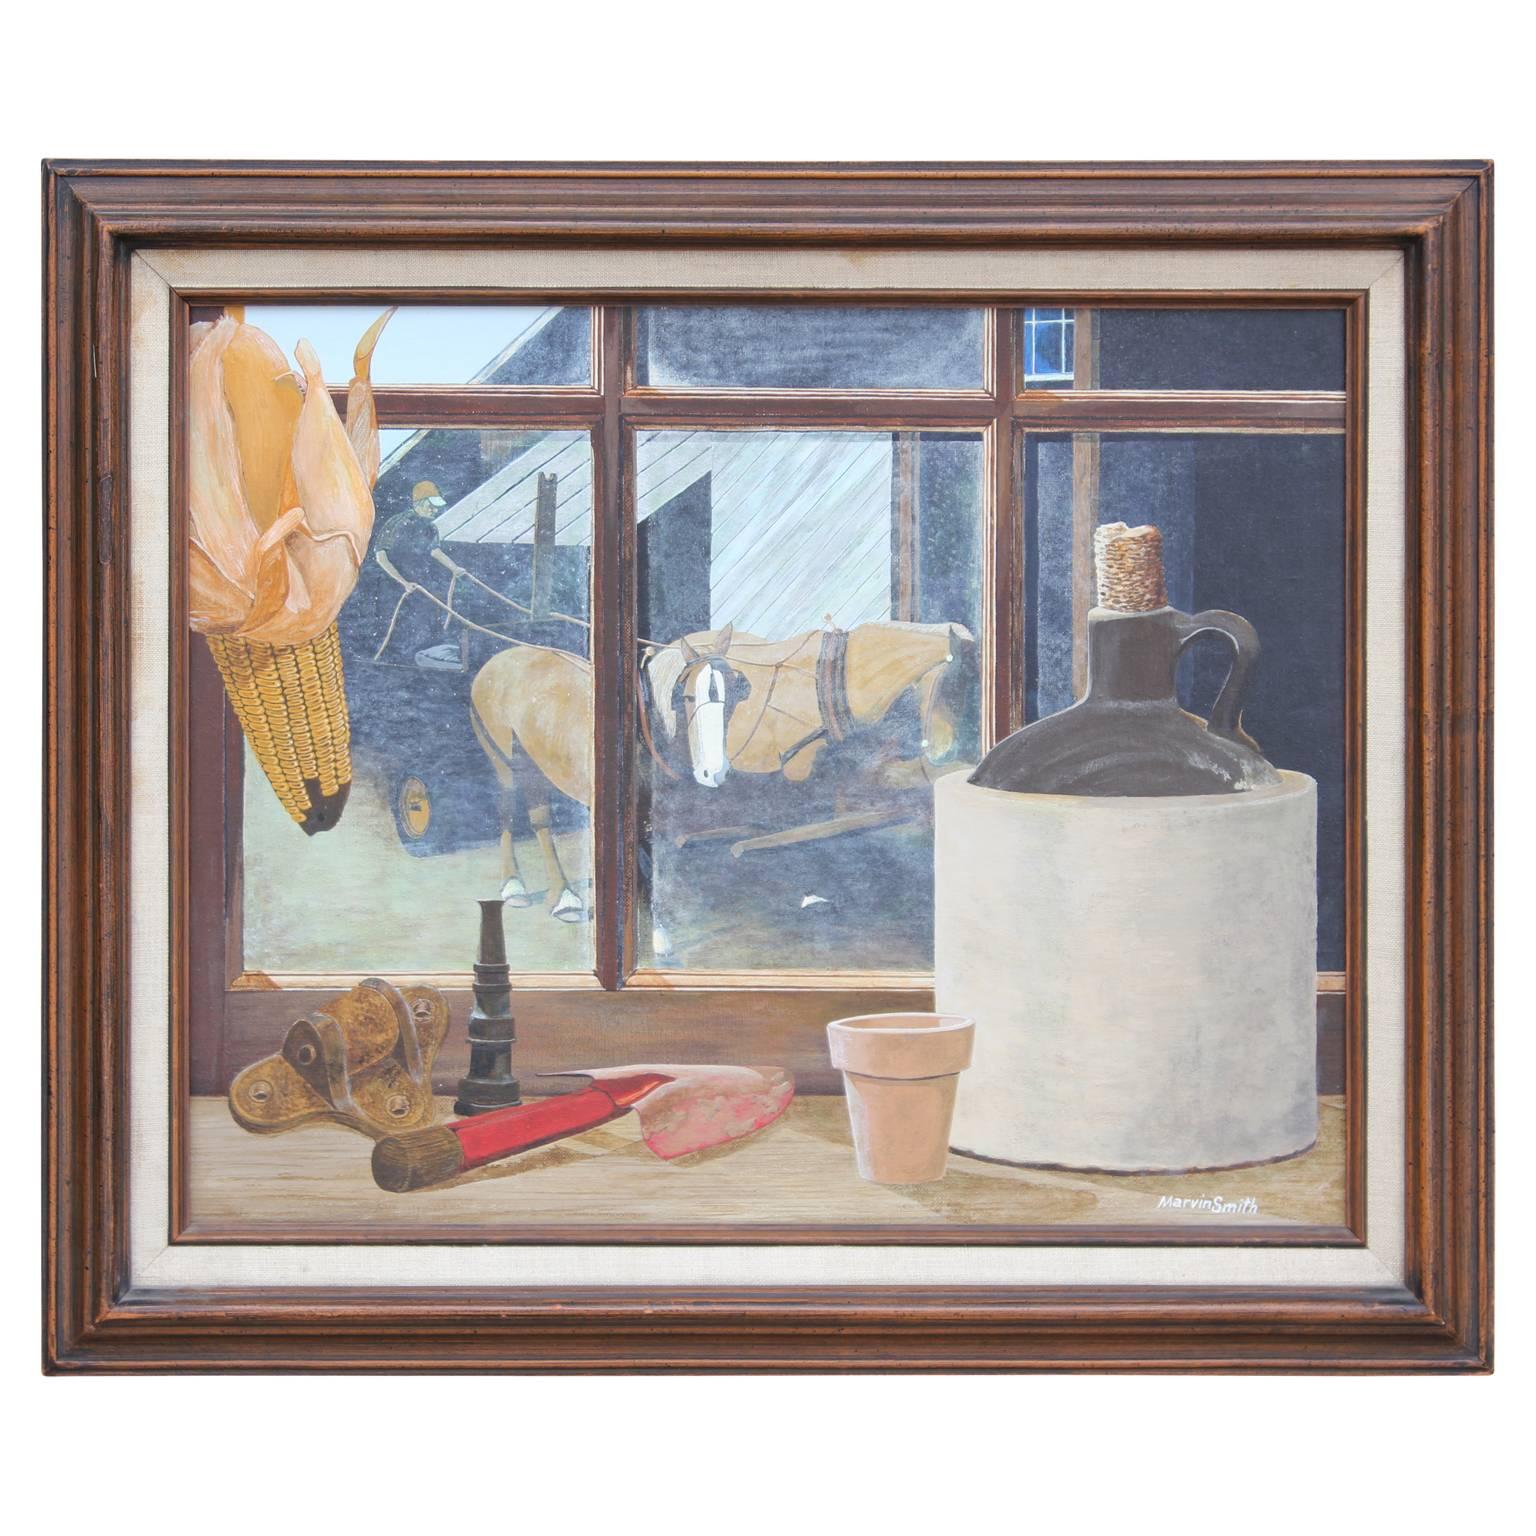 Marvin Smith Animal Painting - Still Life Painting of a Country Window Cill and Horses